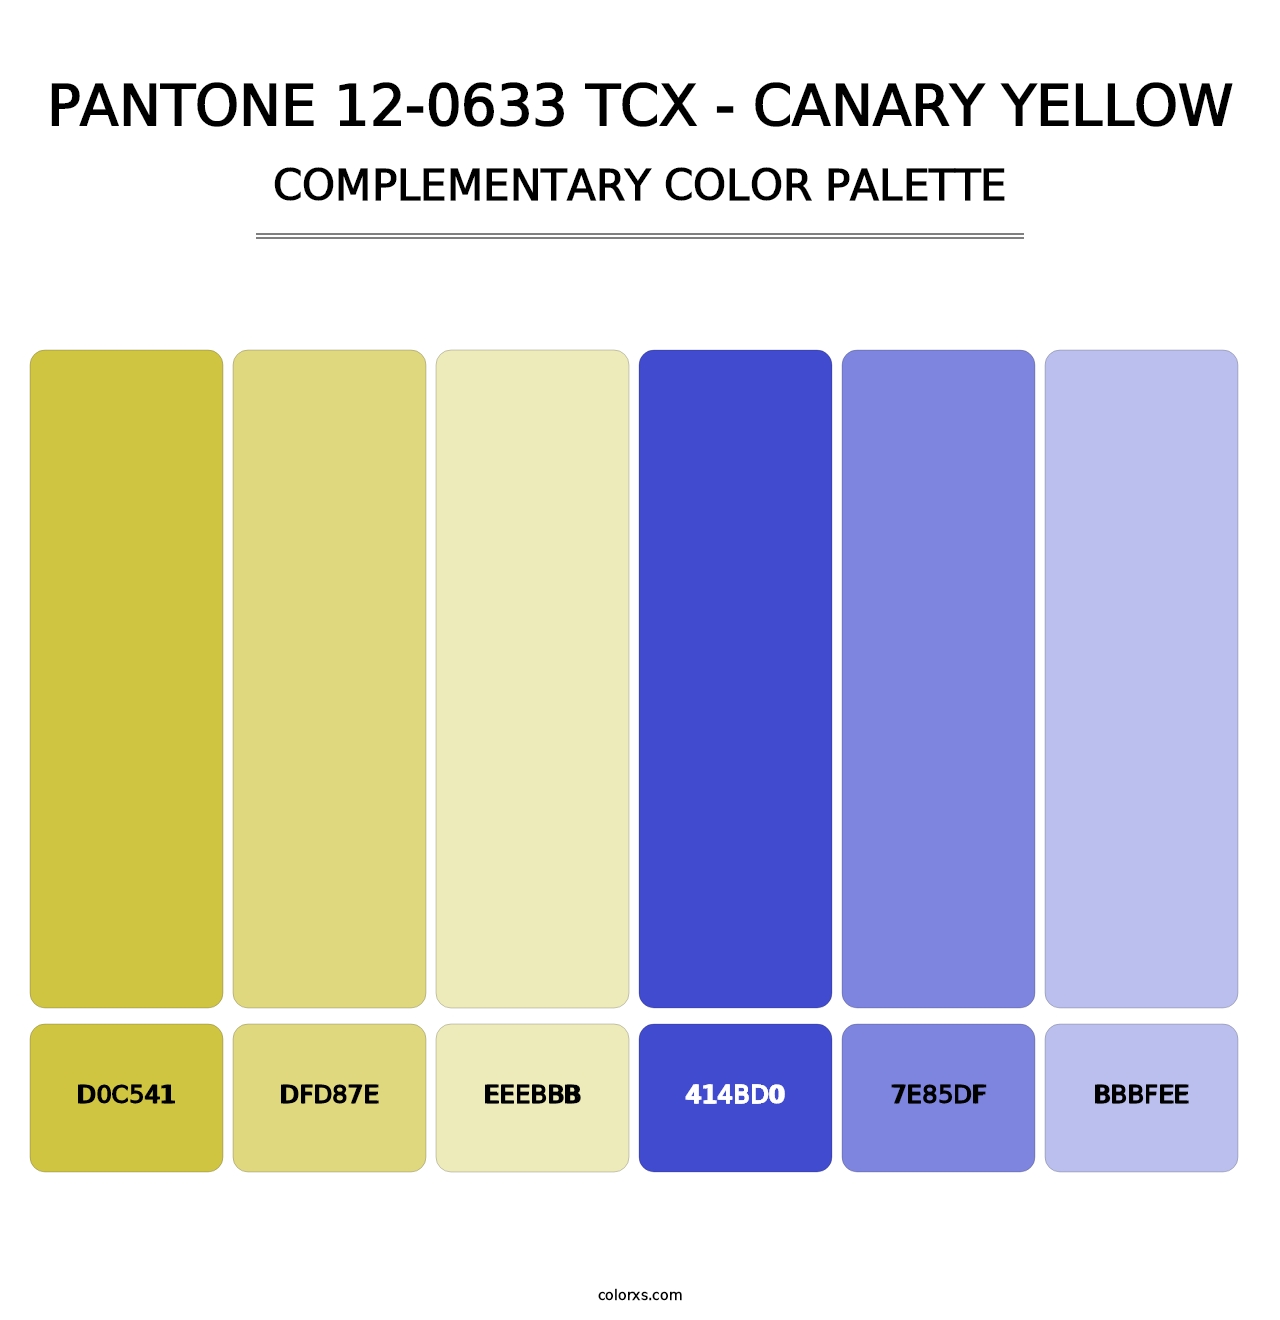 PANTONE 12-0633 TCX - Canary Yellow - Complementary Color Palette